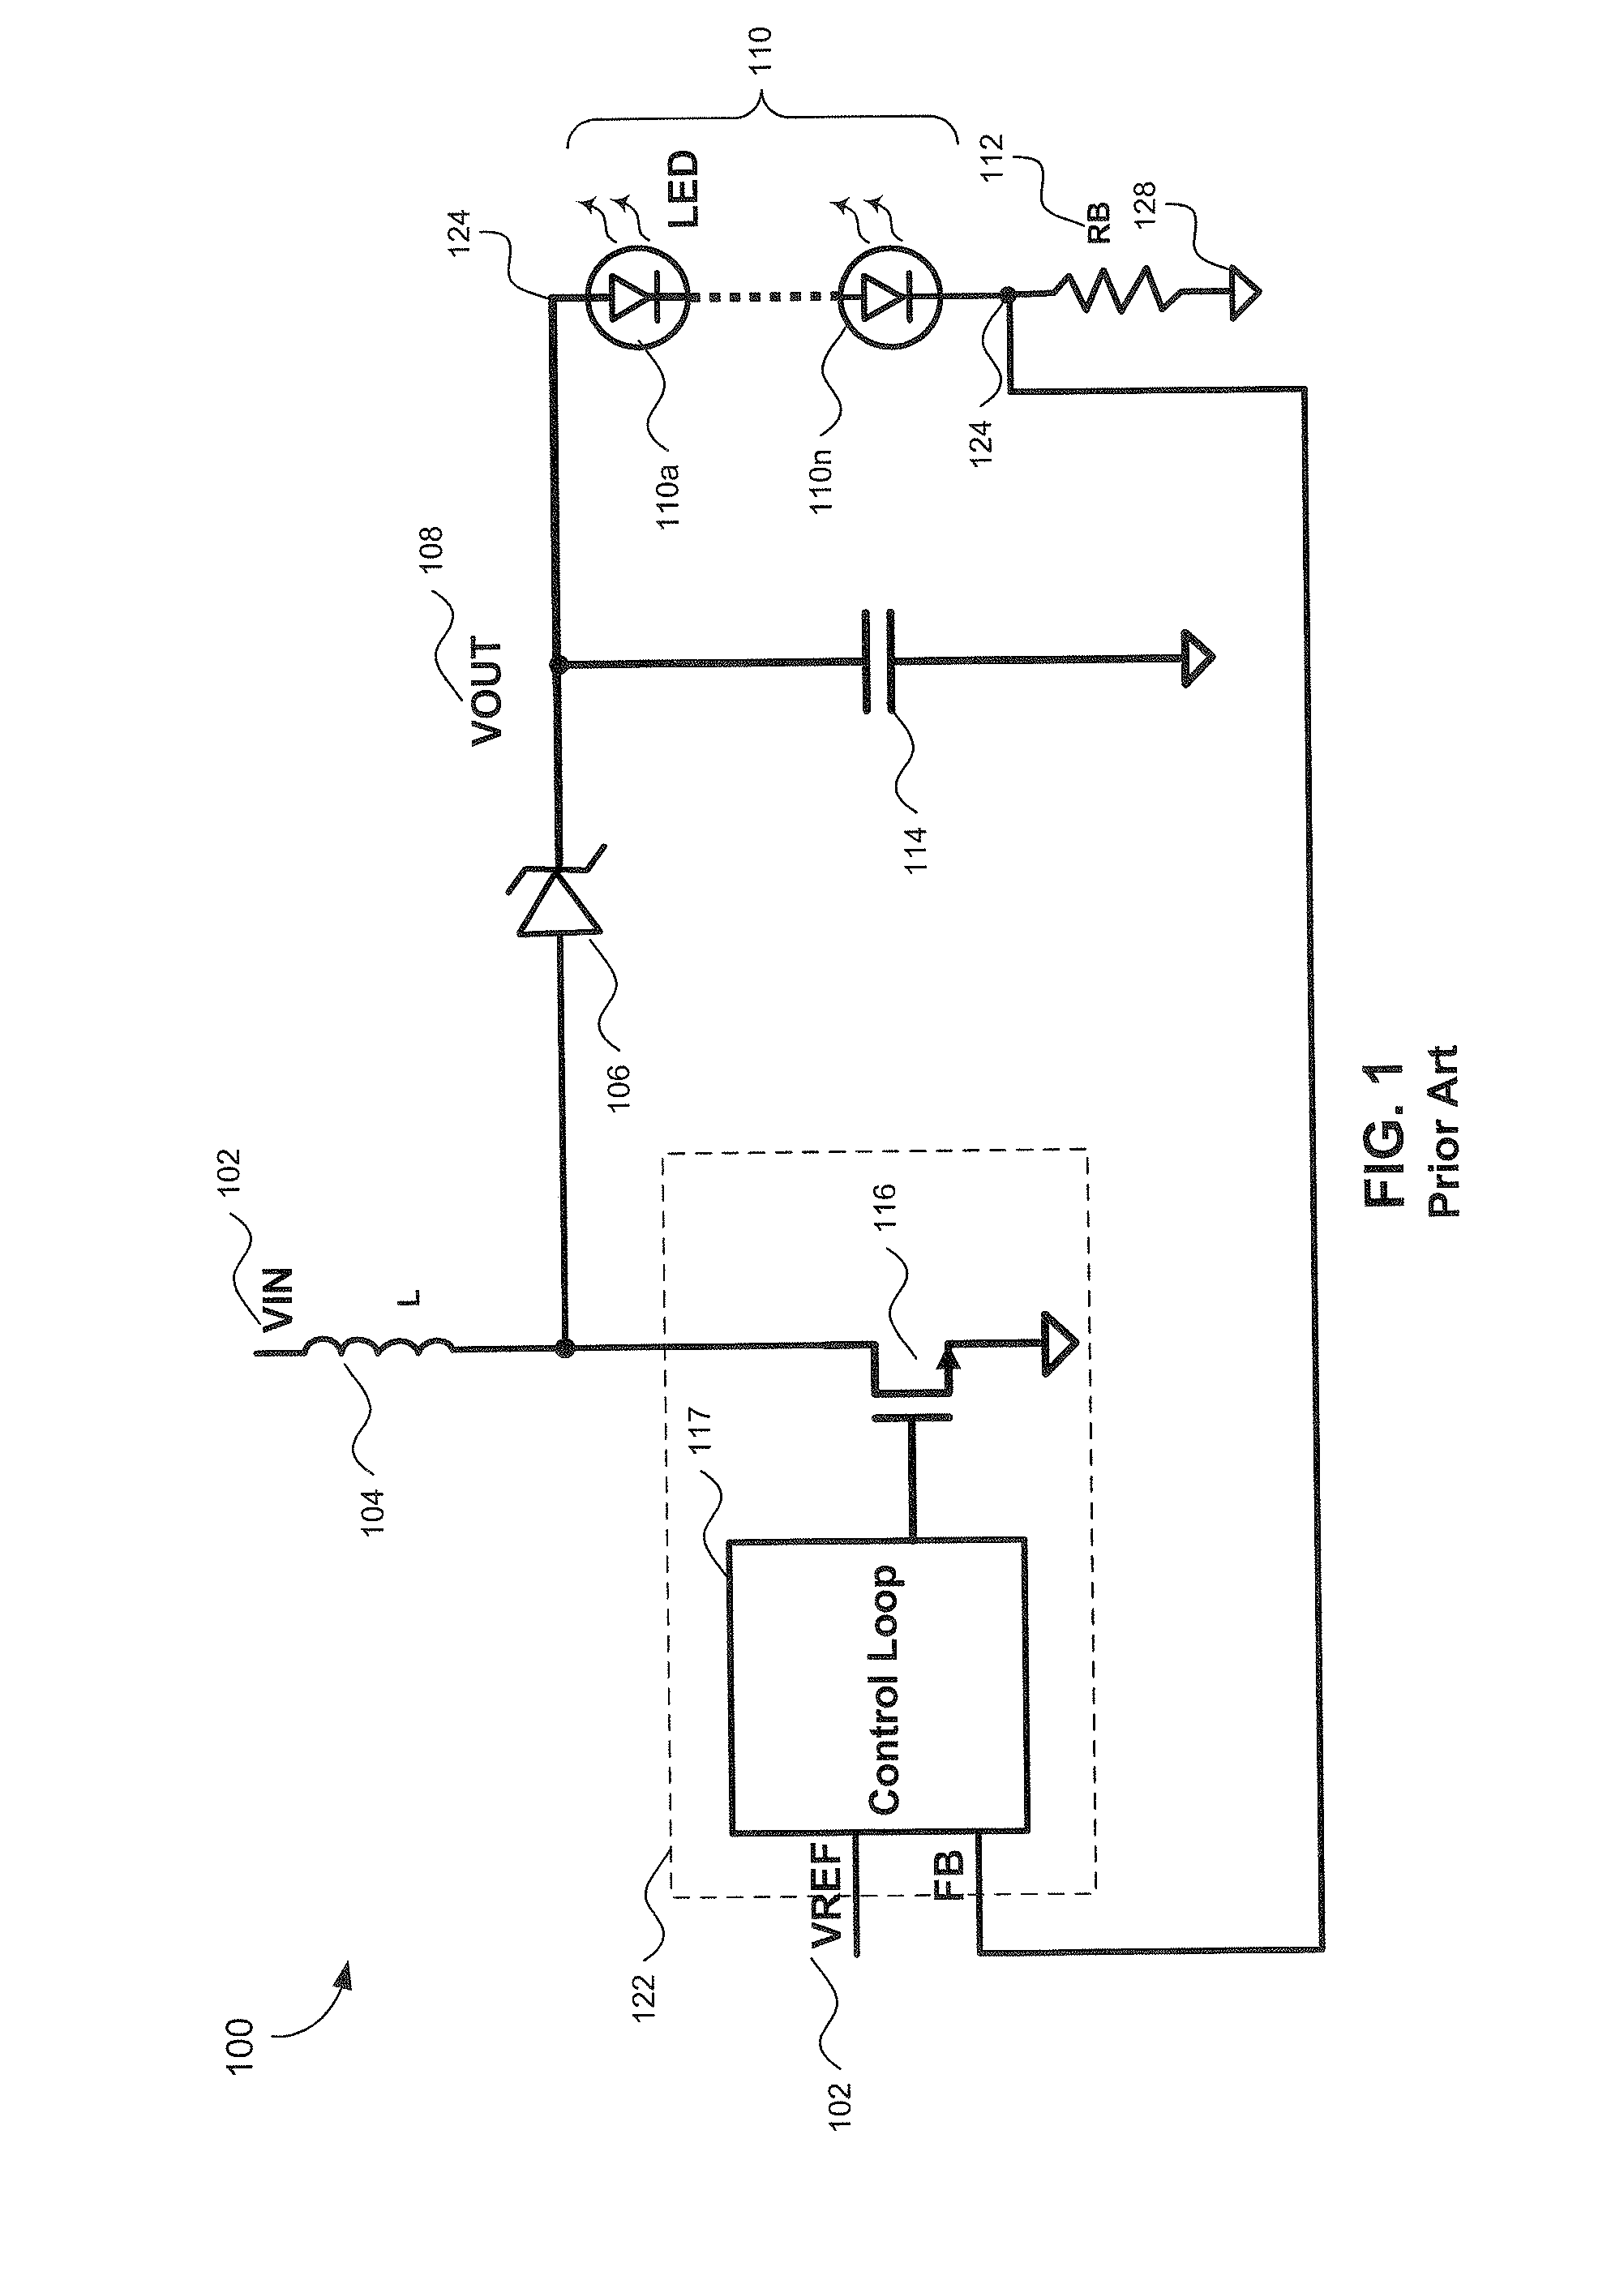 Single Inductor Serial-Parallel LED Driver